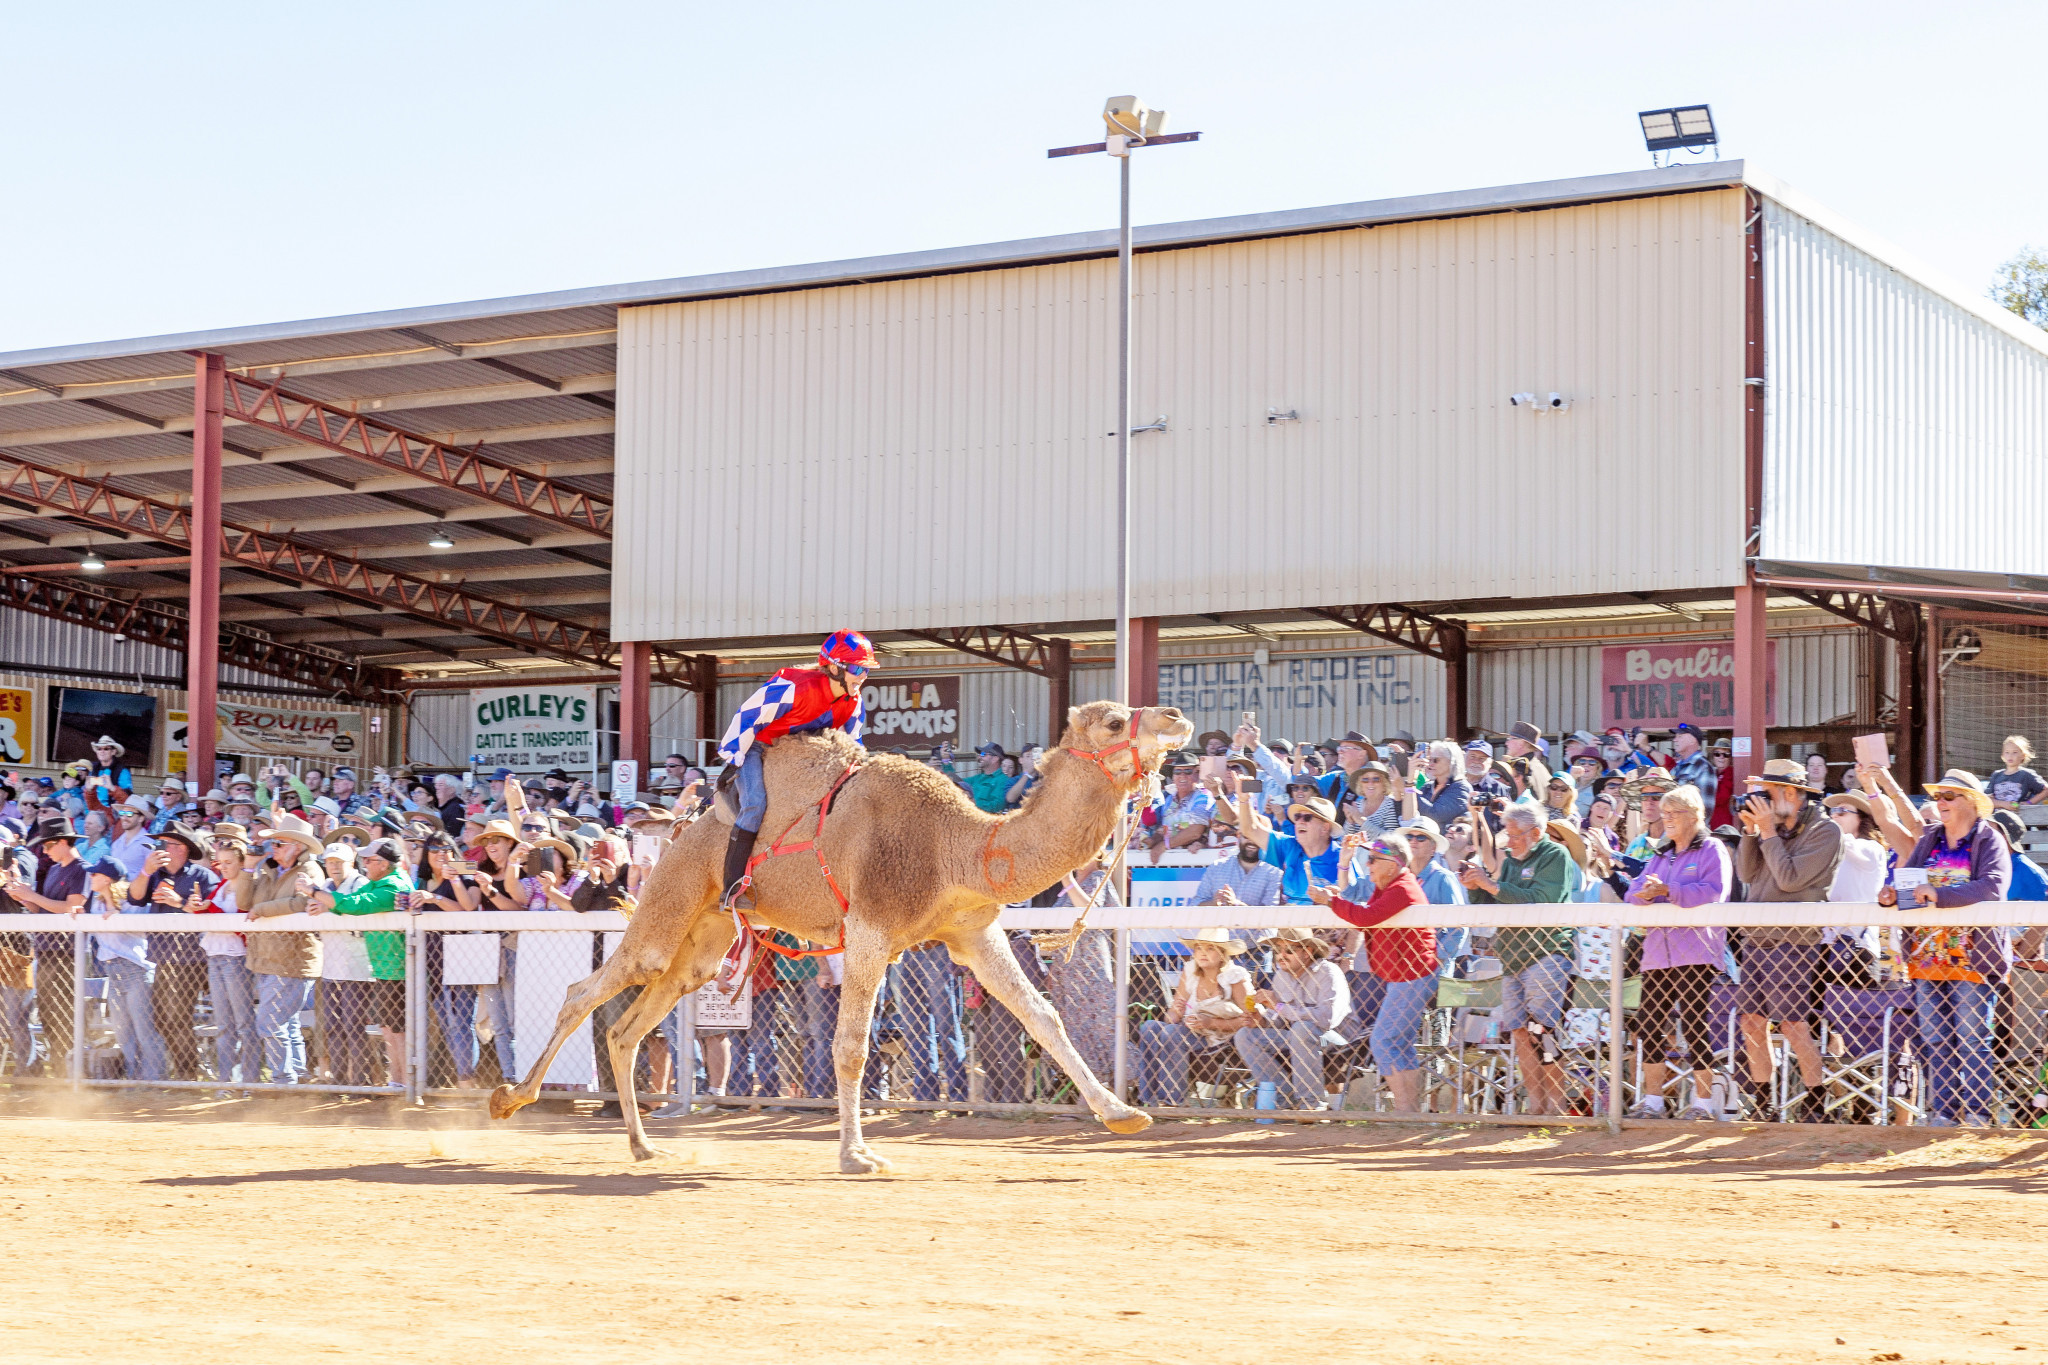 Massive crowds turn up to the Boulia Camel Races each year, but in 1997 when the first event was staged, only a few hundred people came to the Outback event.